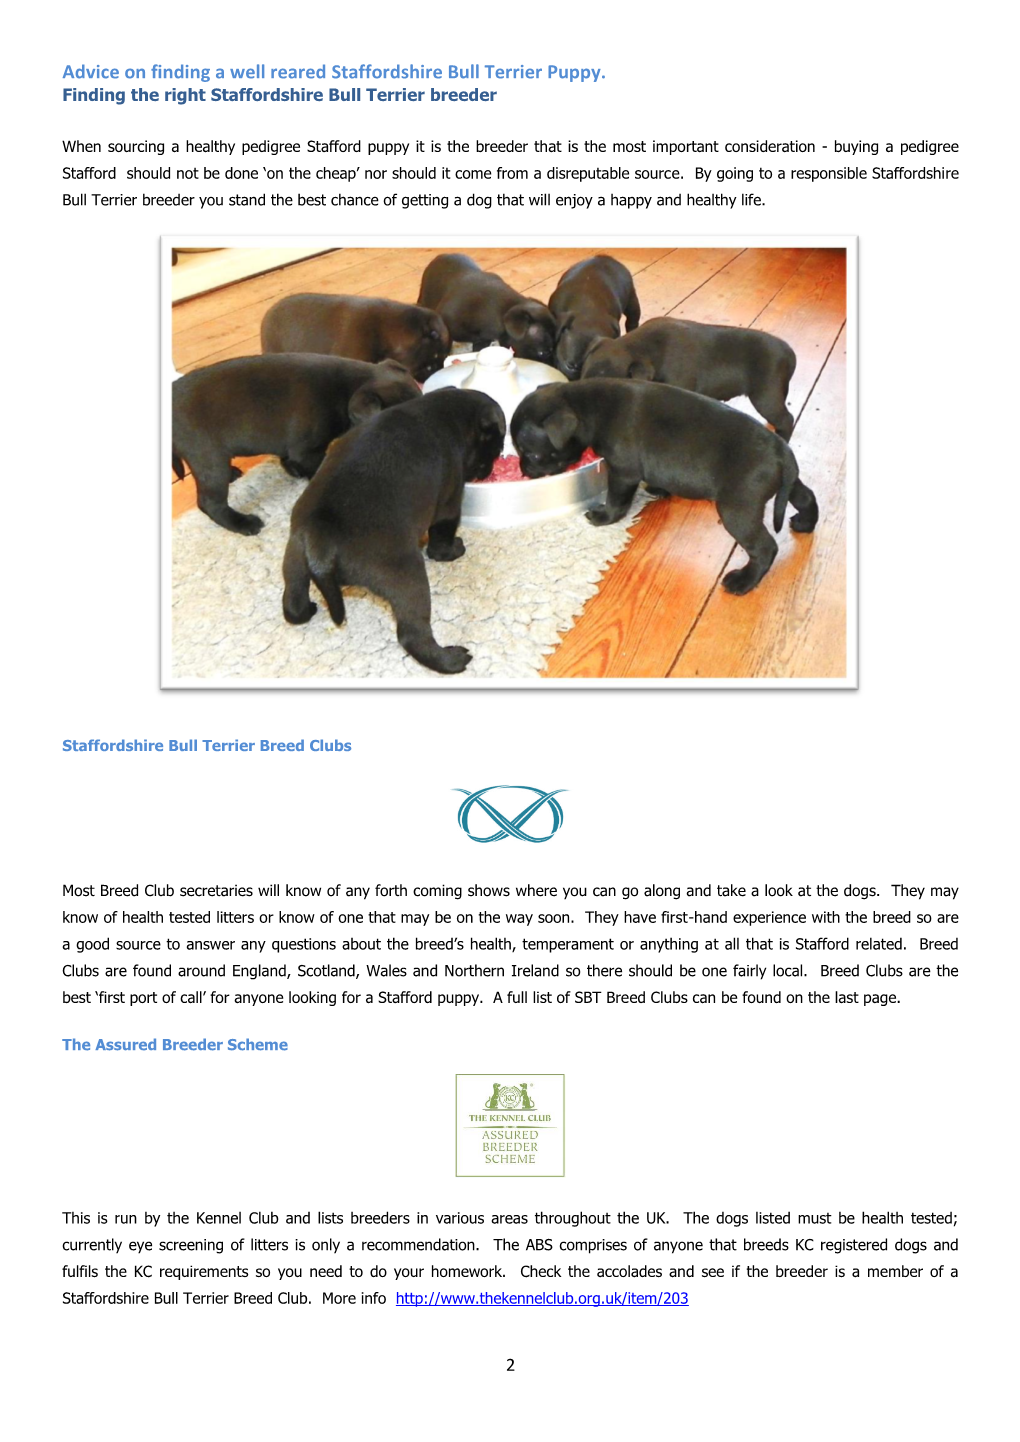 Advice on Finding a Well Reared Staffordshire Bull Terrier Puppy